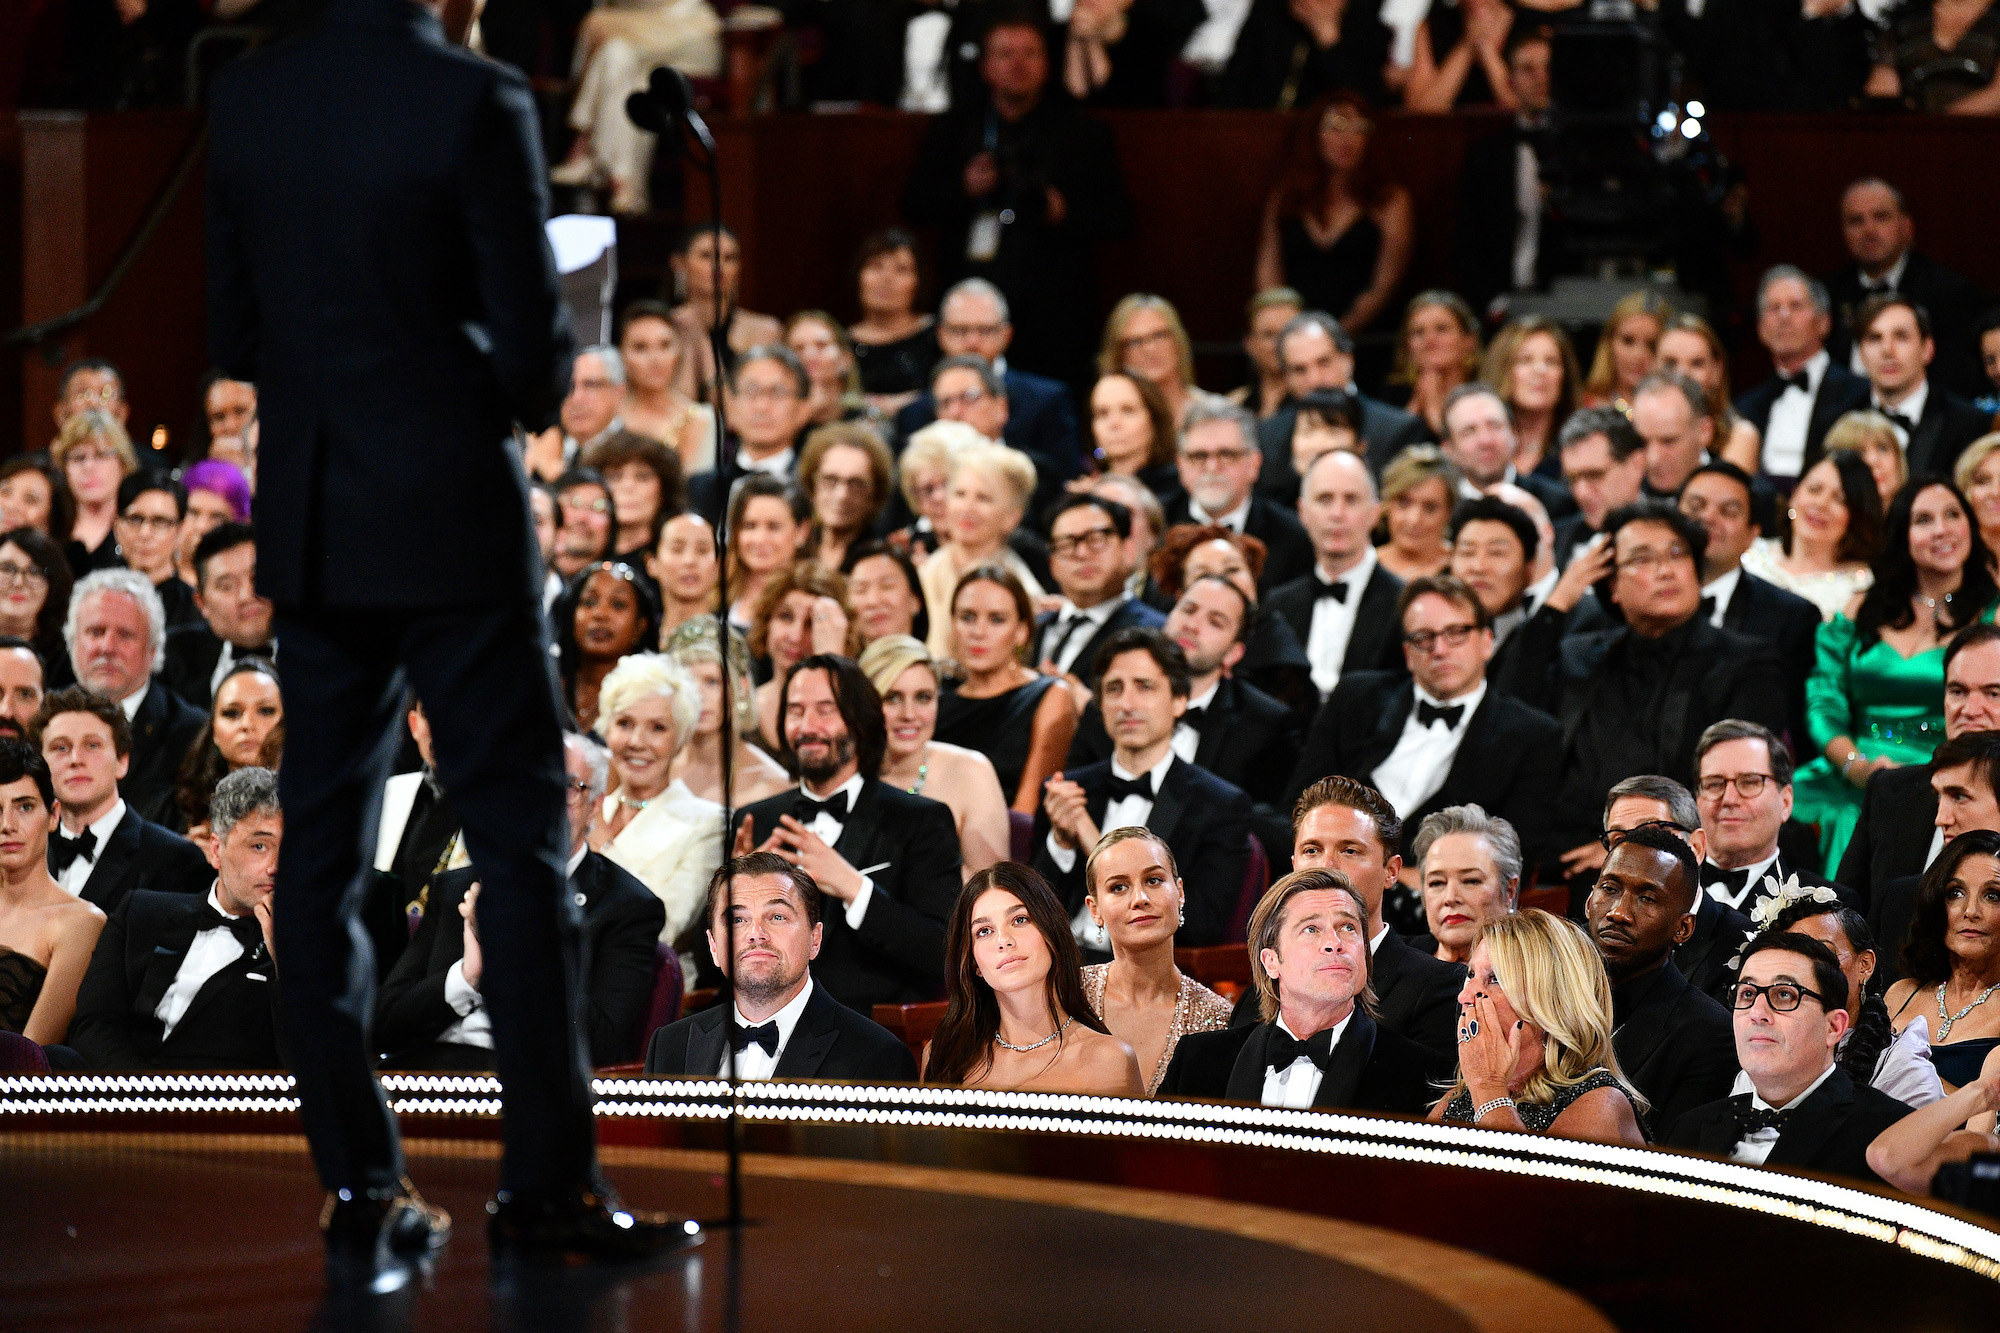 The audience at the Oscars